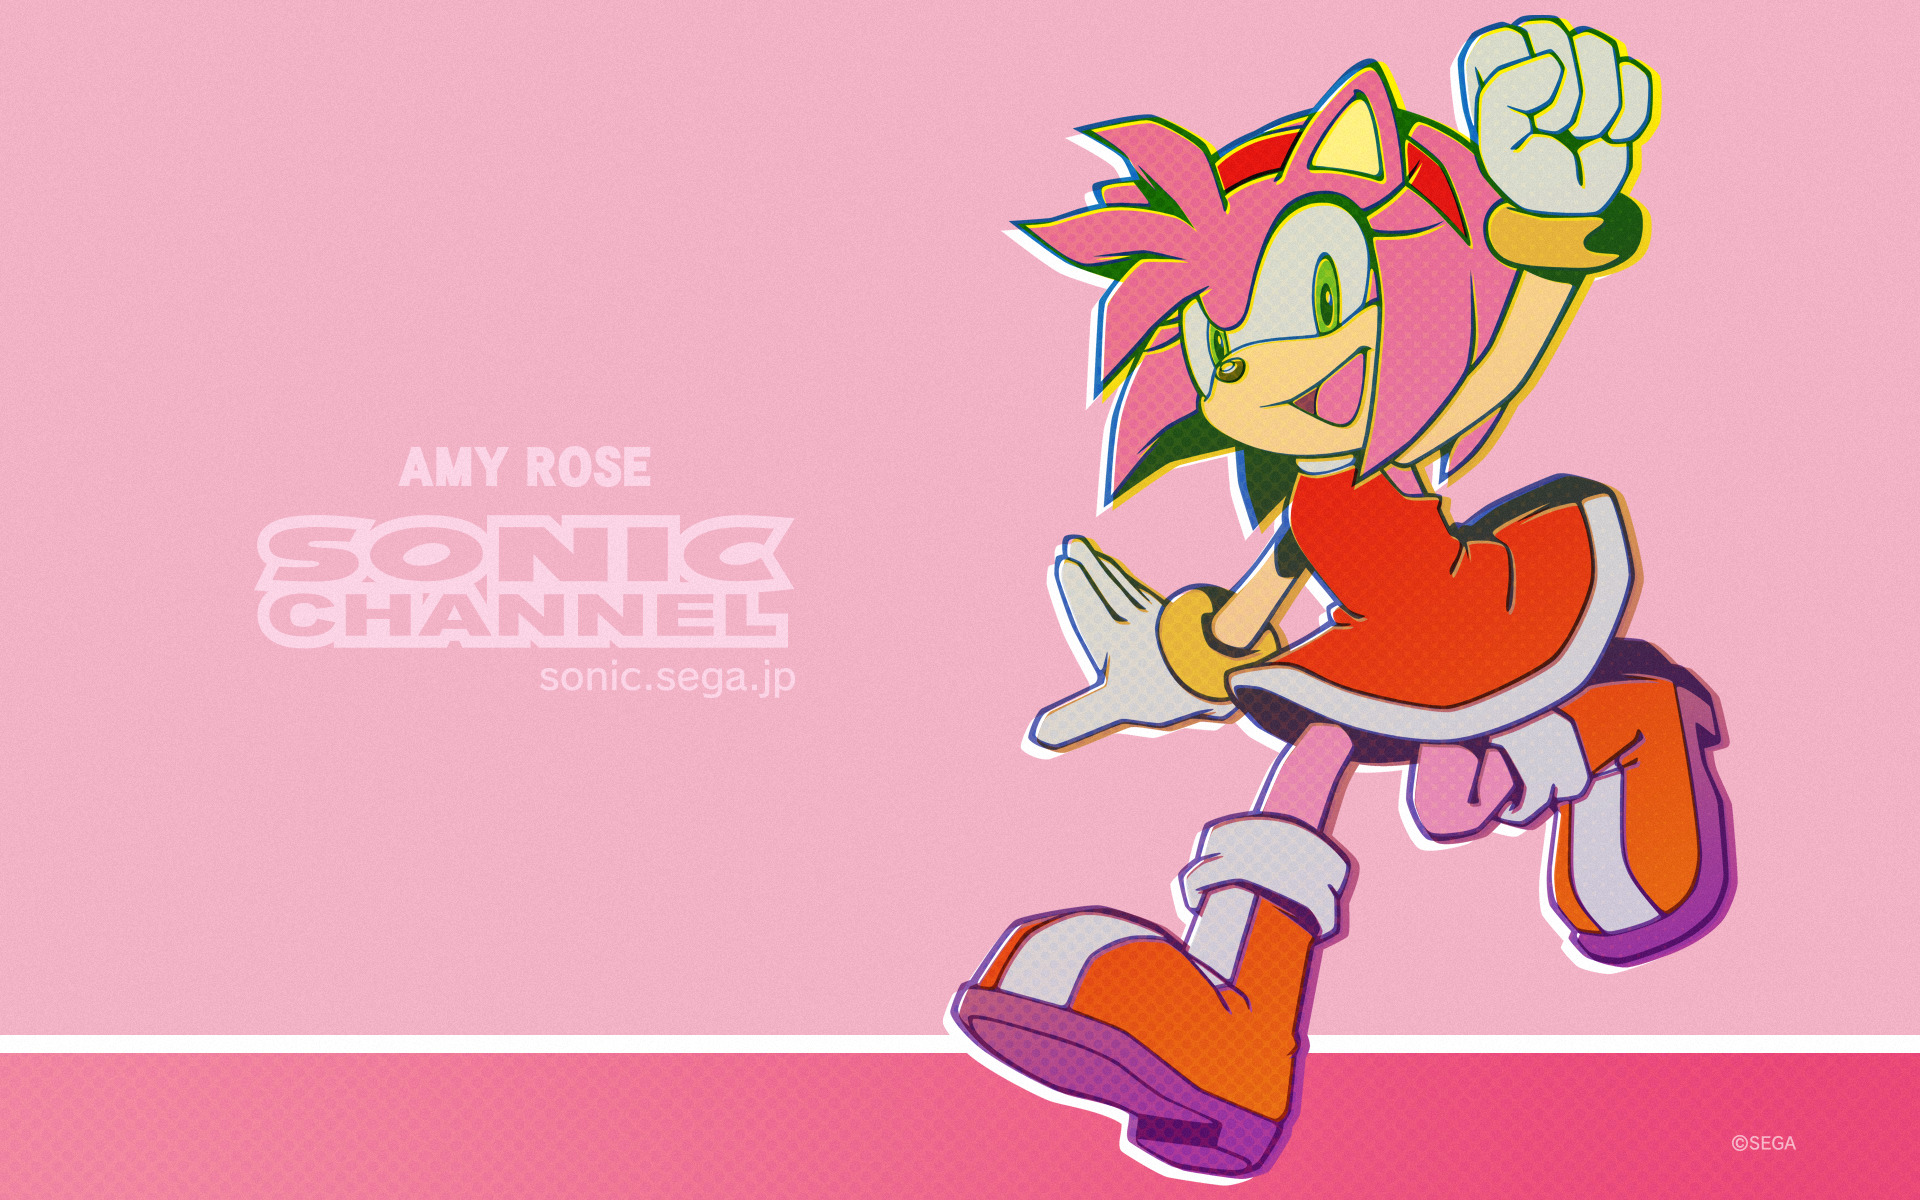 video game, sonic the hedgehog, amy rose, sonic channel, sonic